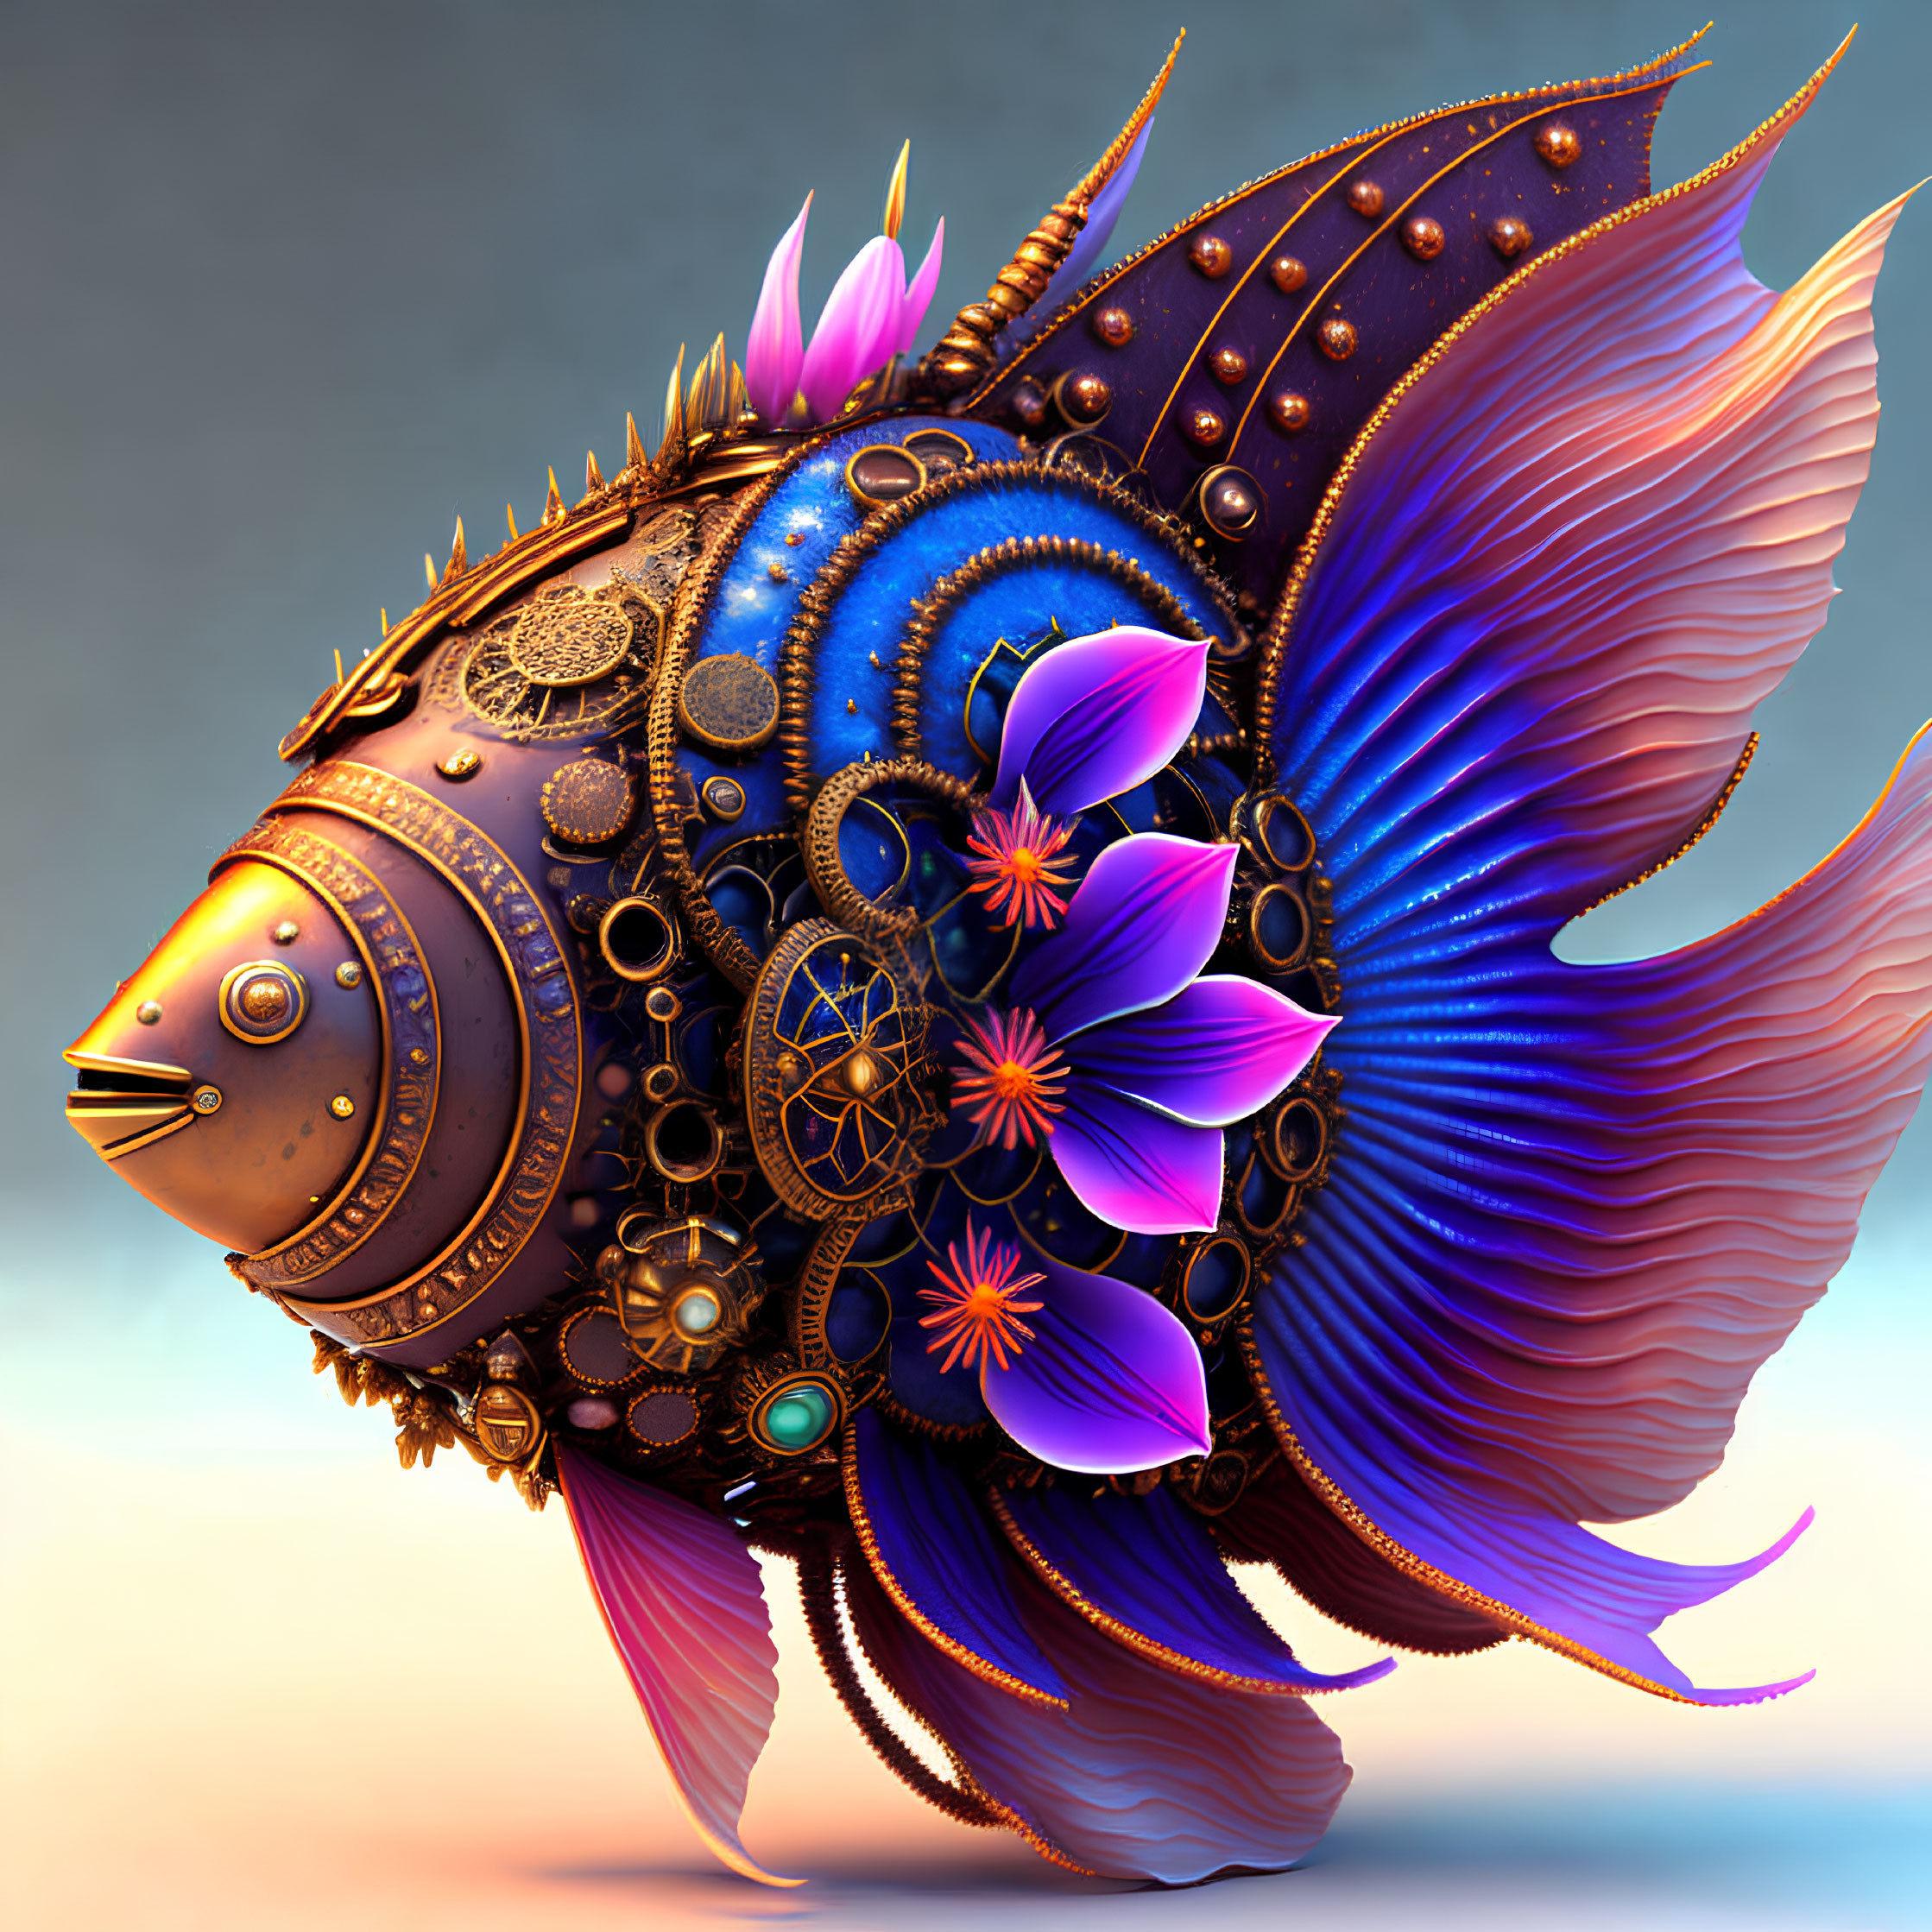 Colorful Steampunk Fish with Gears and Floral Accents